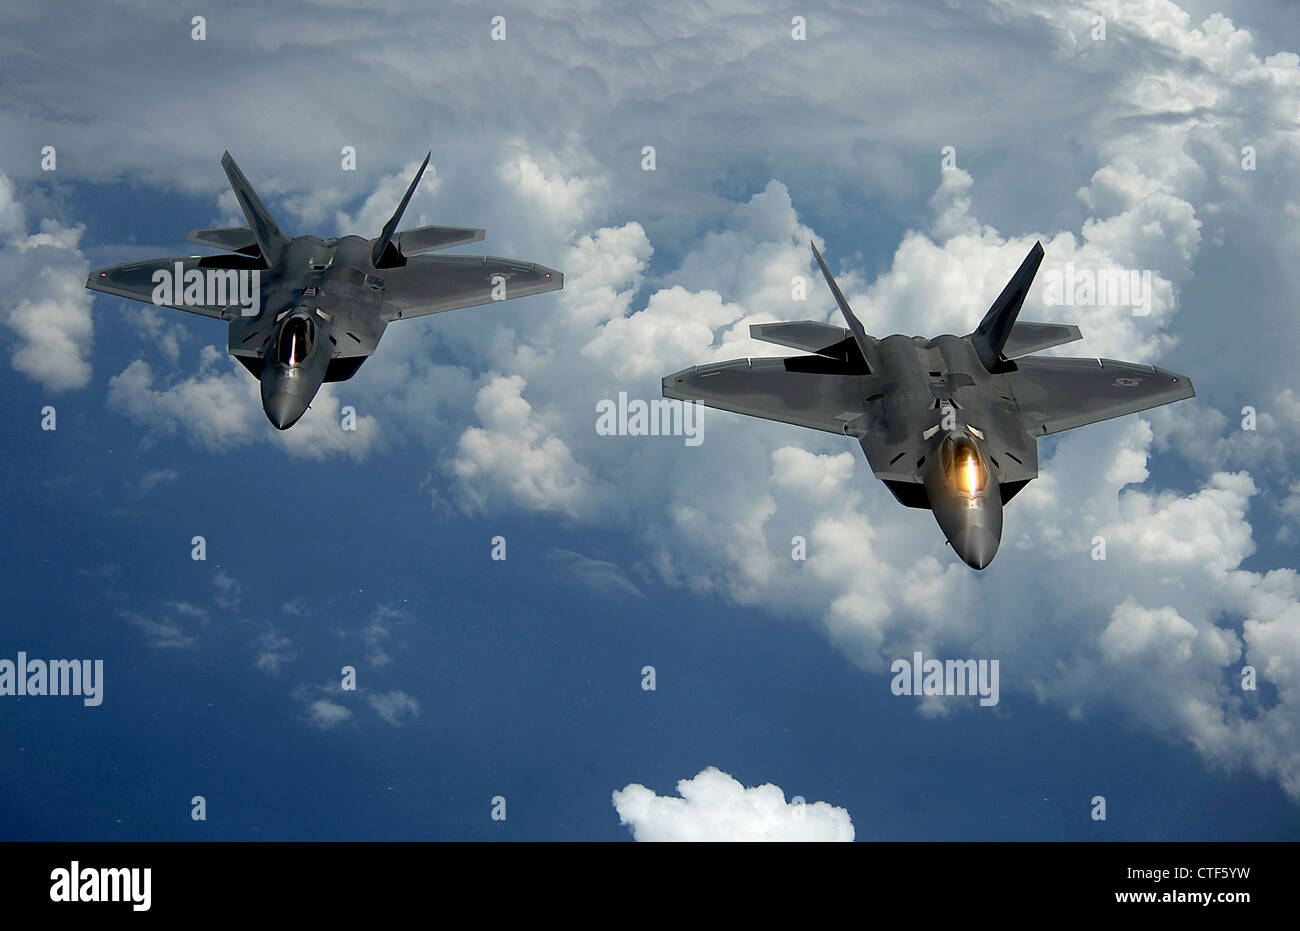 Two US Air Force F-22 Raptor fighter aircraft fly behind in formation July 10, 2012 over Joint Base Andrews, Maryland. The Raptors is the newest aircraft in the Air Force fleet. Stock Photo